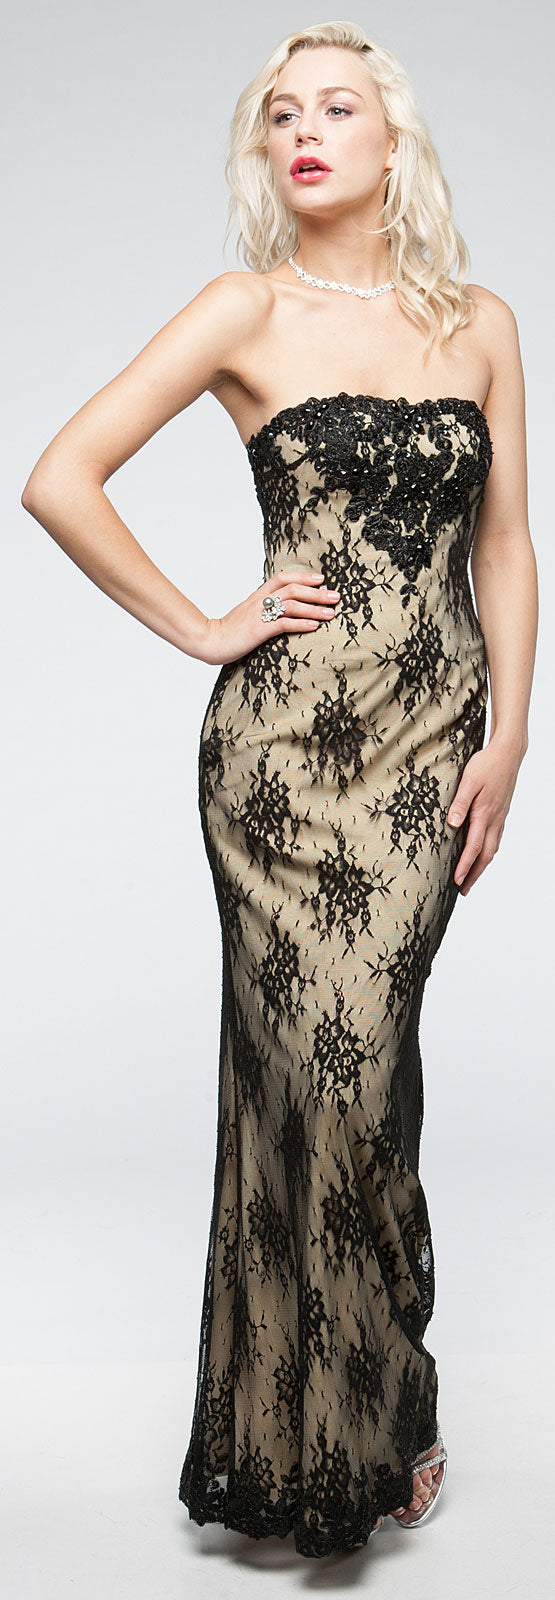 Image of Strapless Floral Mesh Beaded Long Formal Evening Dress  in Black